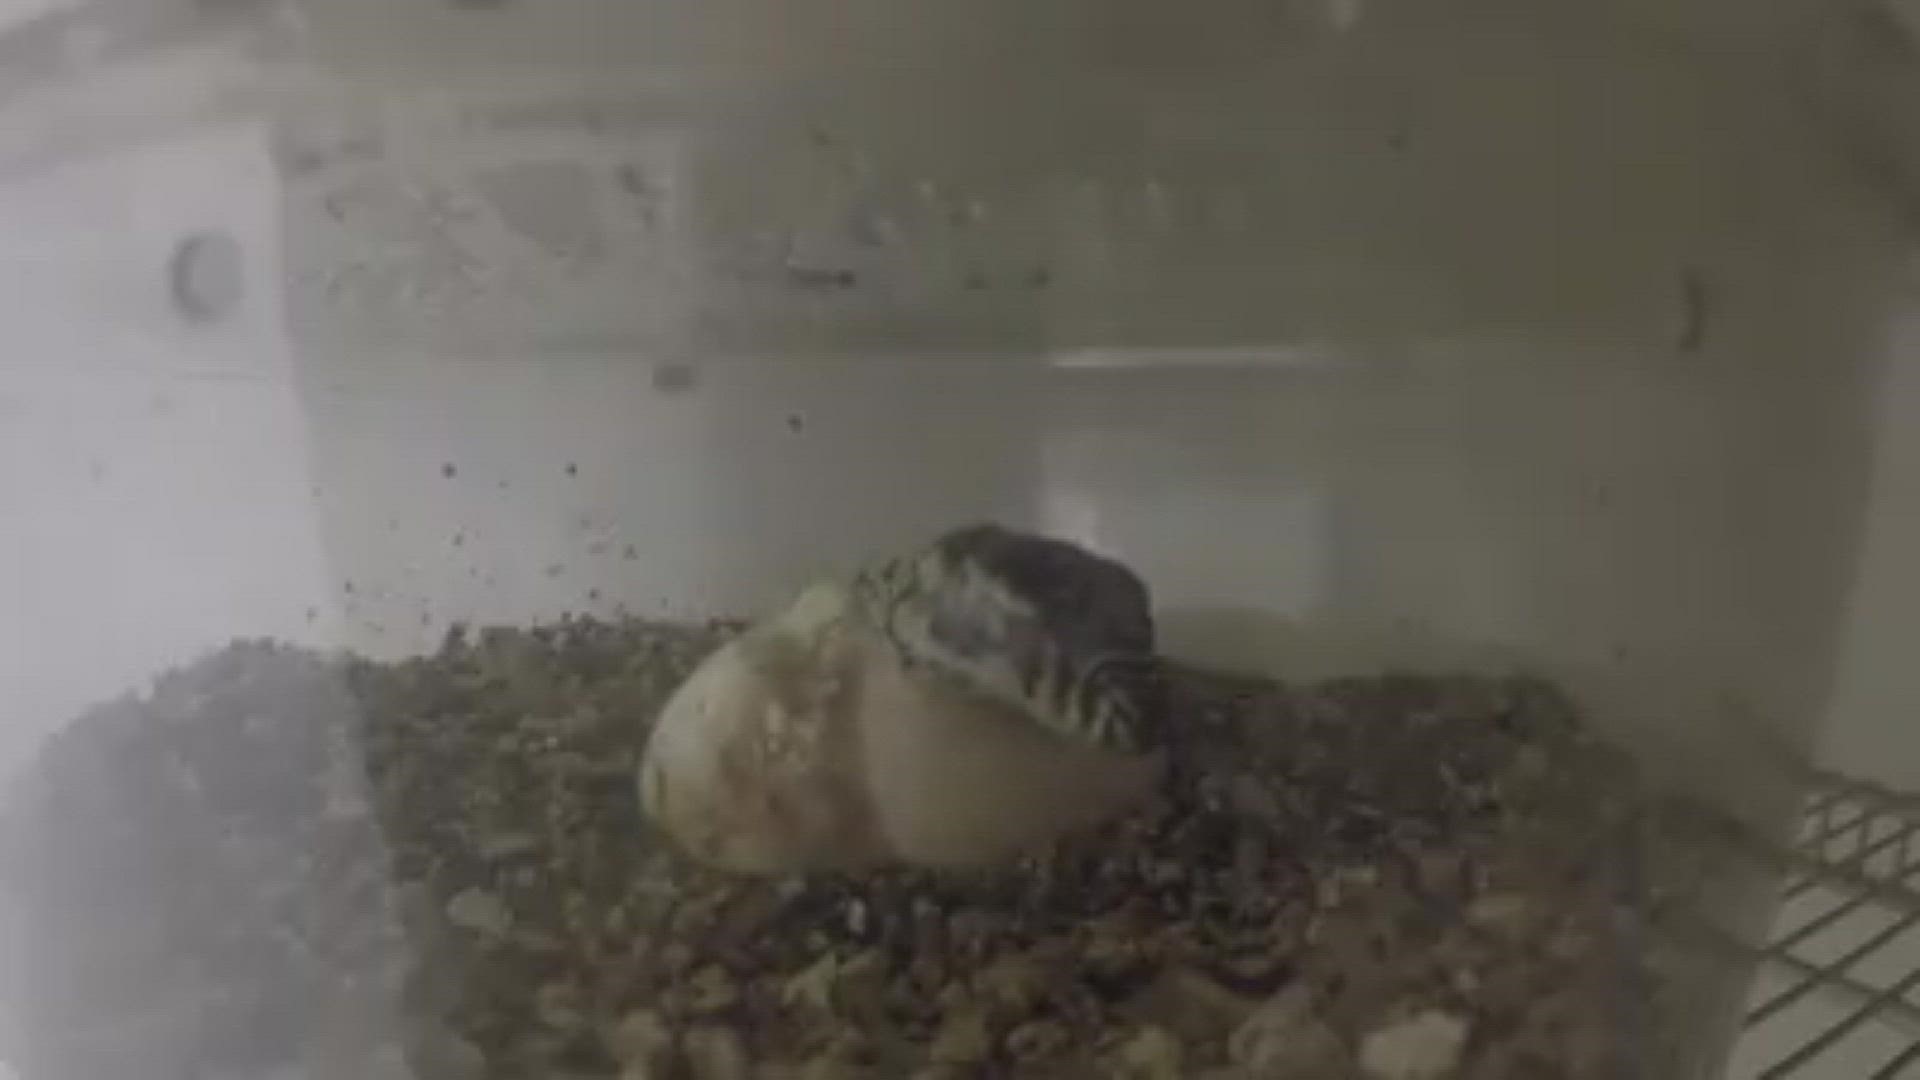 The Denver Zoo welcomed four Komodo dragon hatchlings back in December, and blessed the world with a video of one of them hatching. It's hauntingly beautiful.